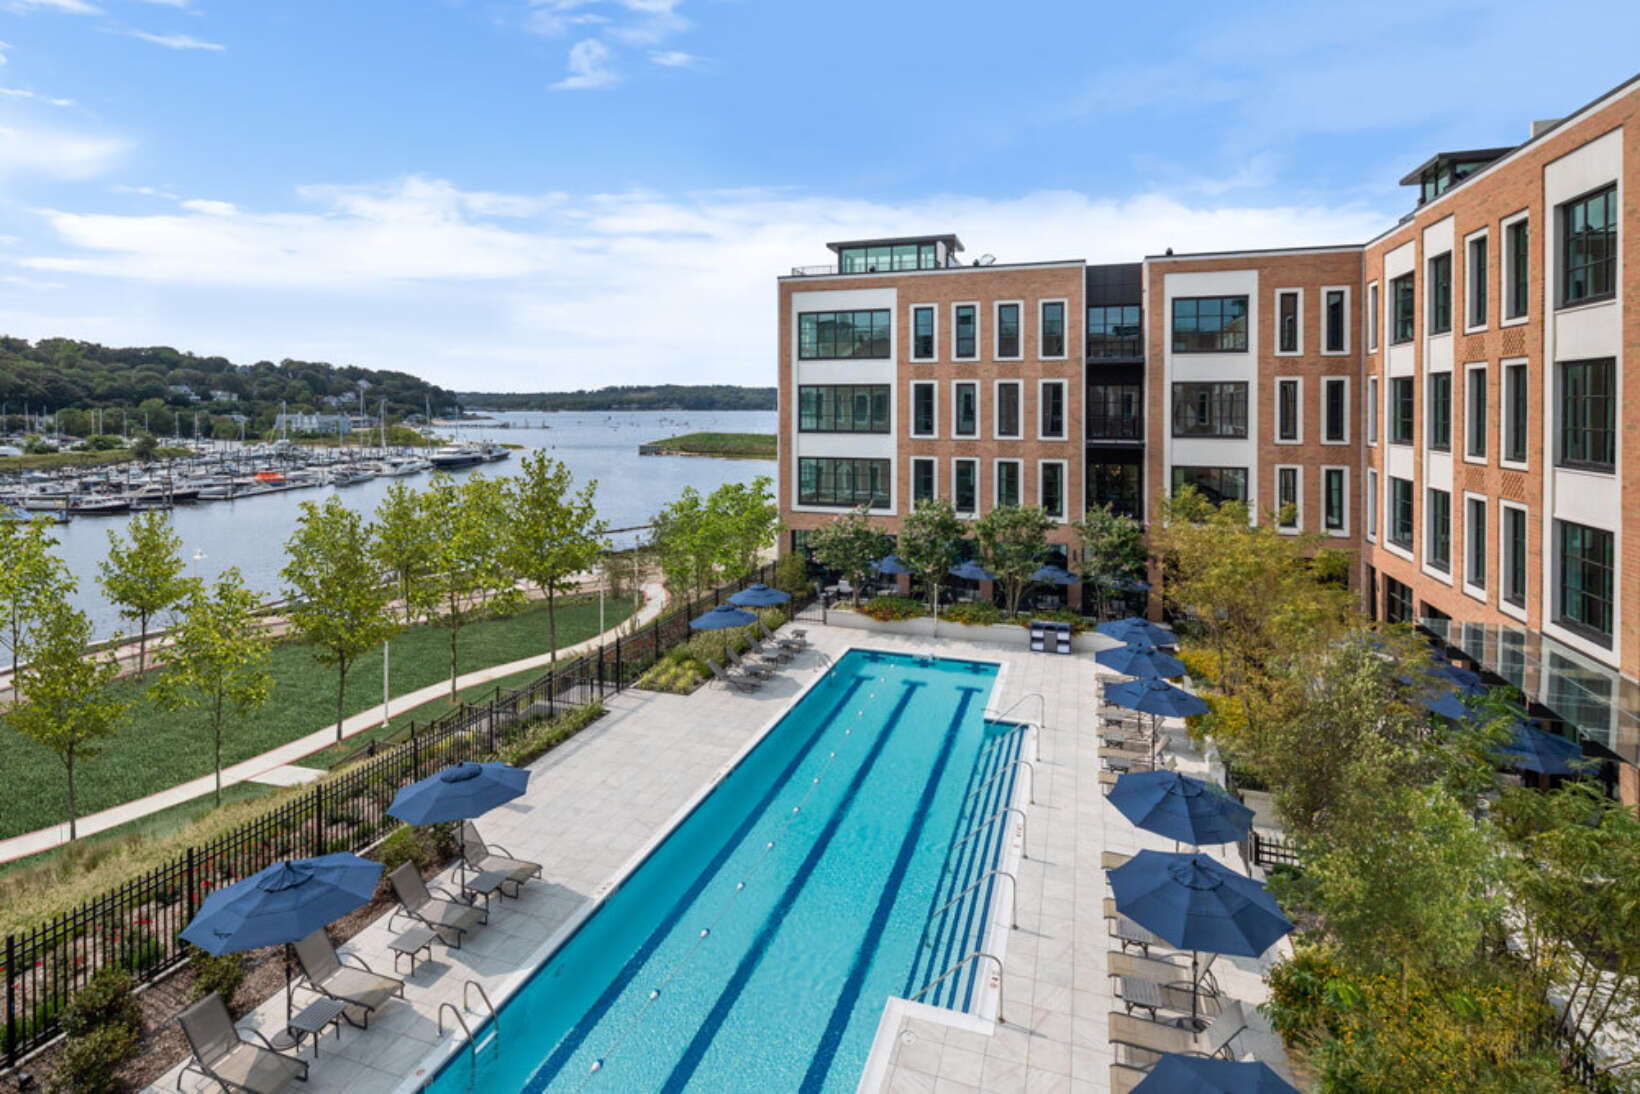 Exterior view of the pool at The Beacon at Gravies Point